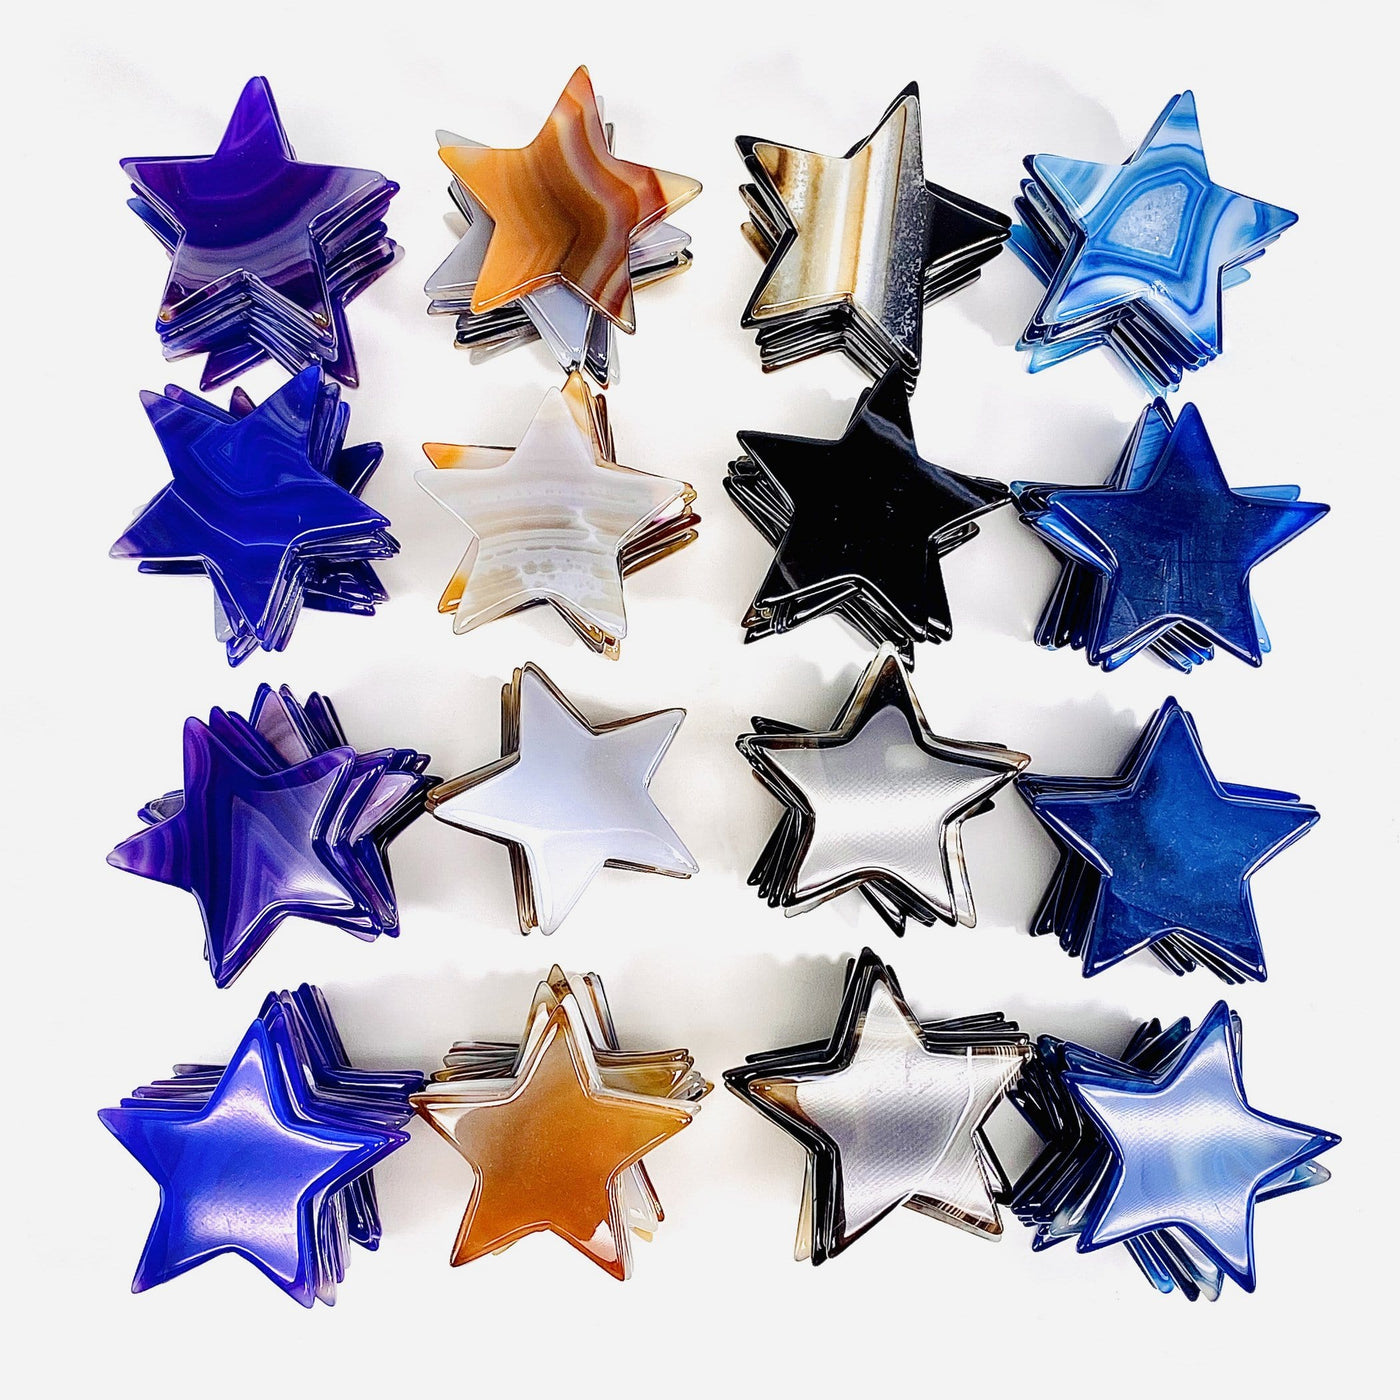 Picture of all the varieties of agate stars we have available. Displayed on a white background.